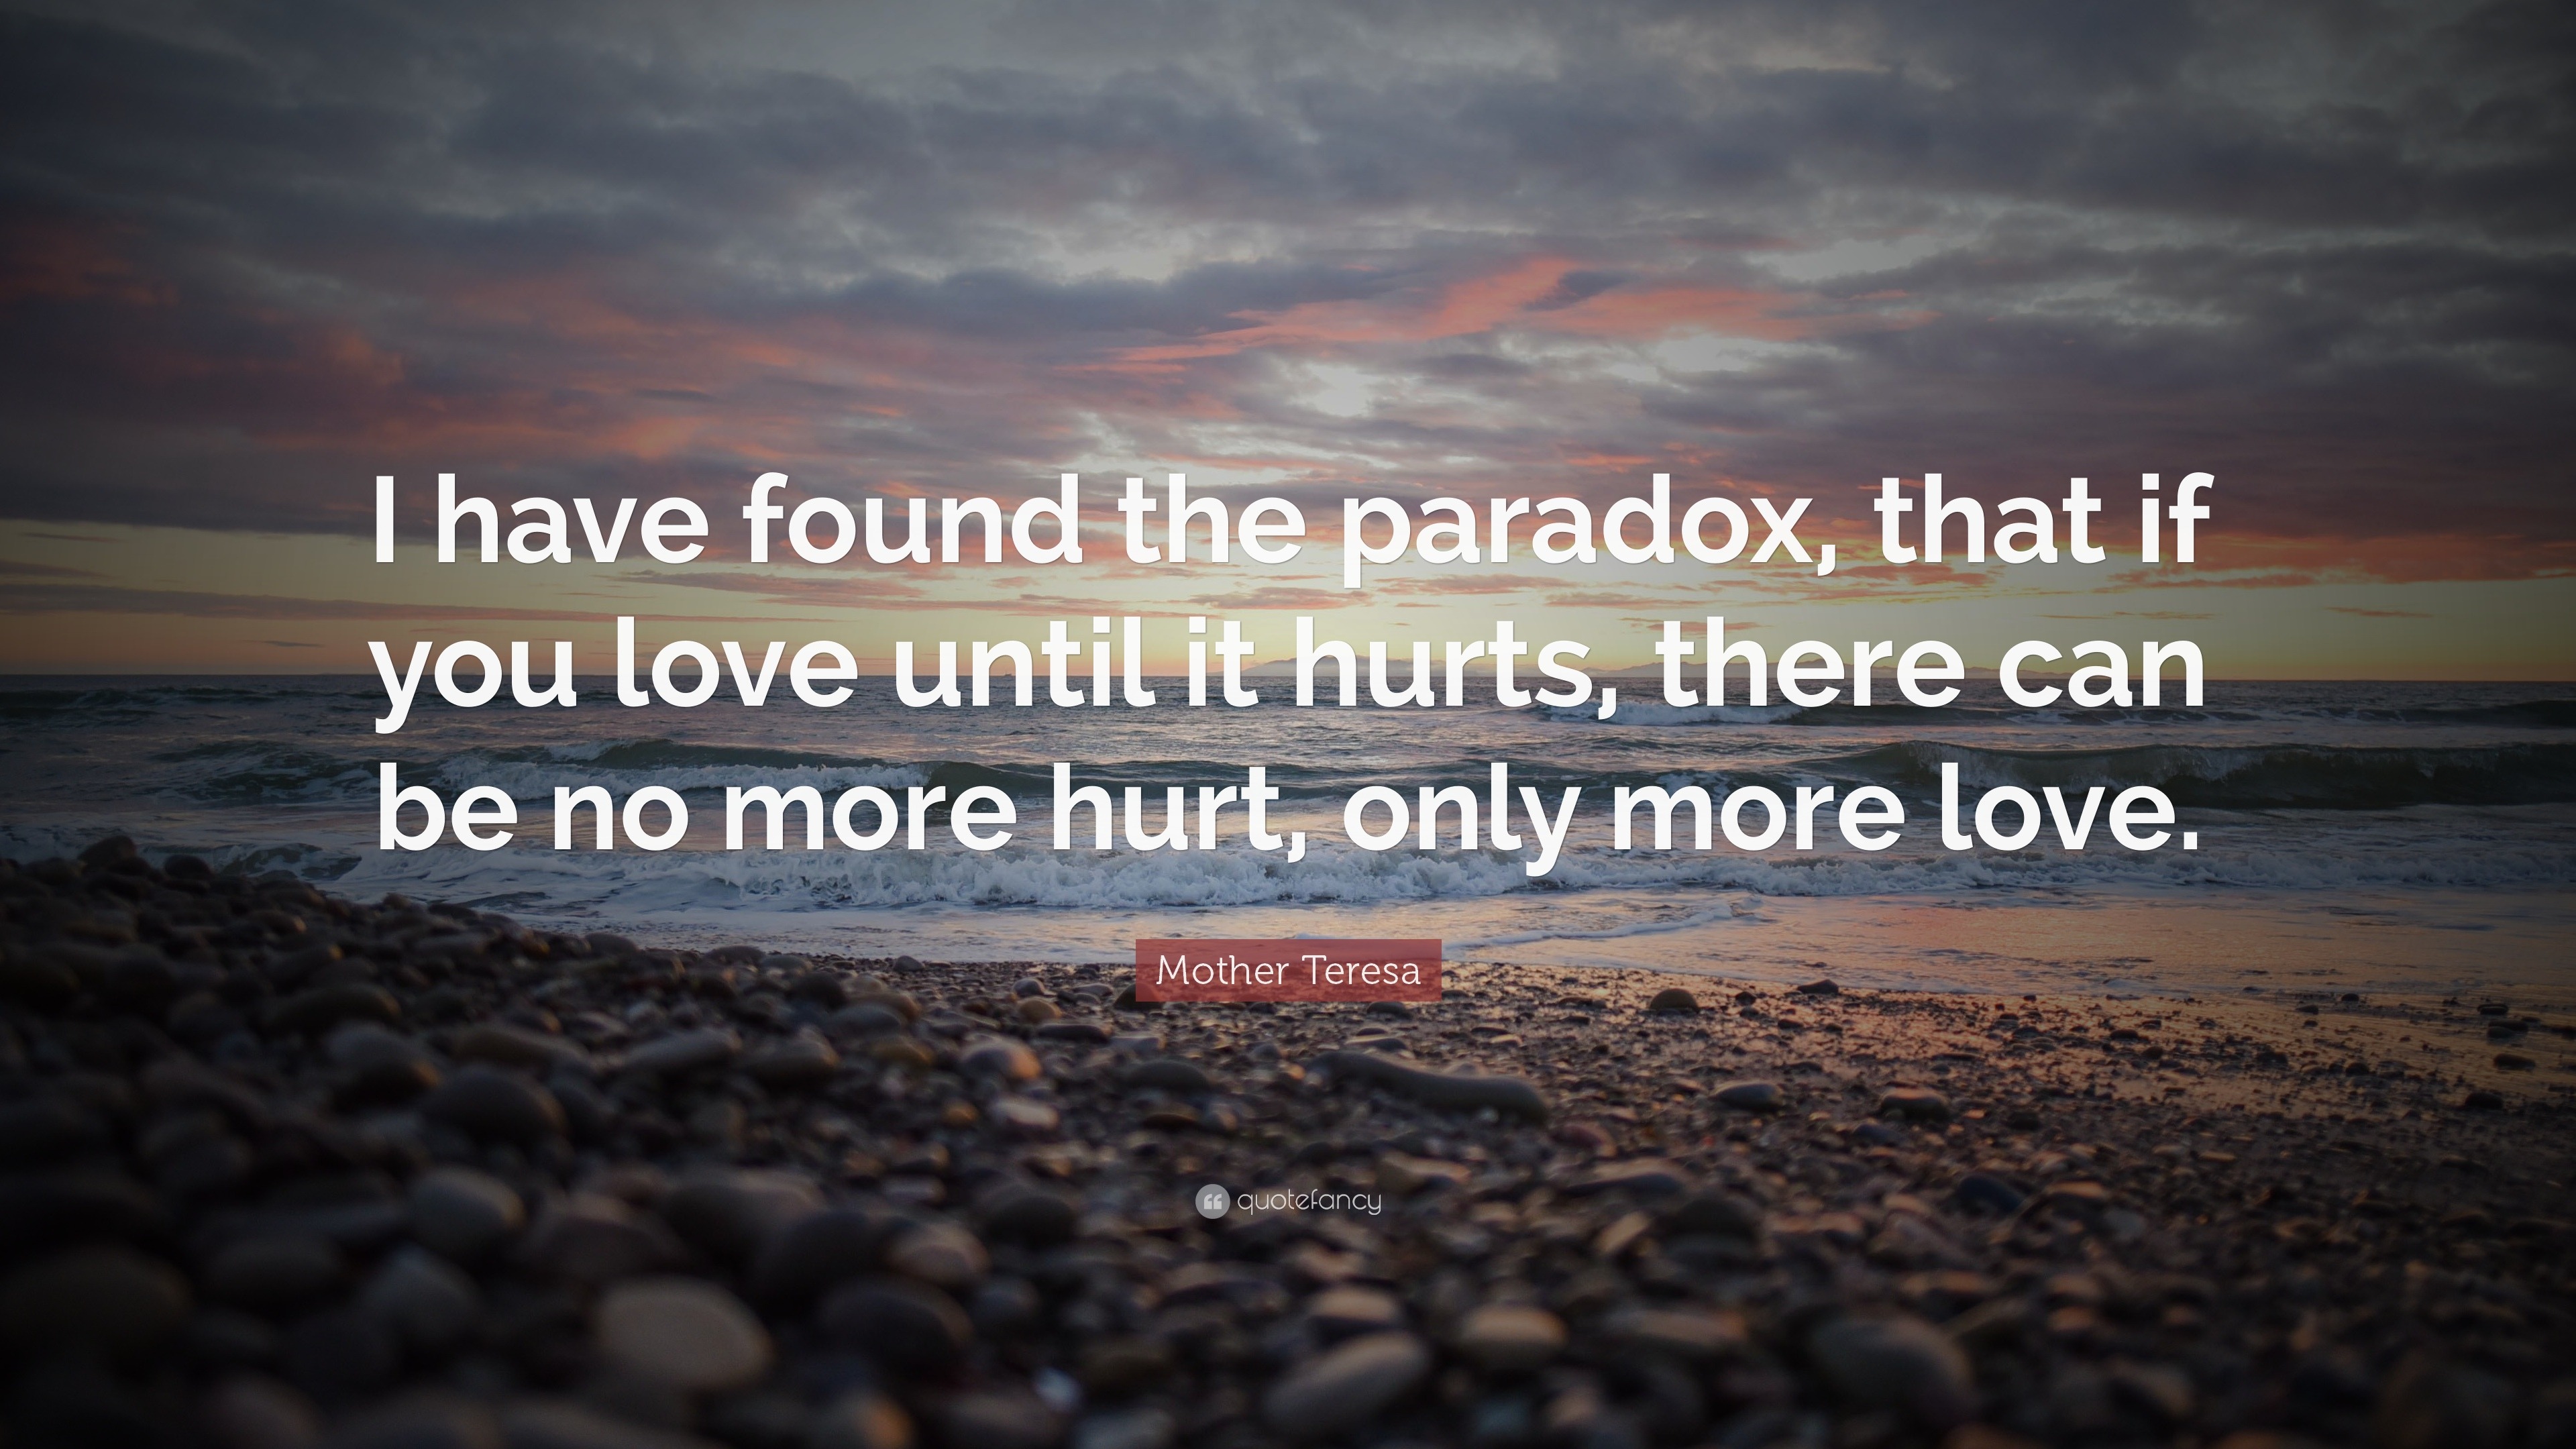 Mother Teresa Quote “I have found the paradox that if you love until